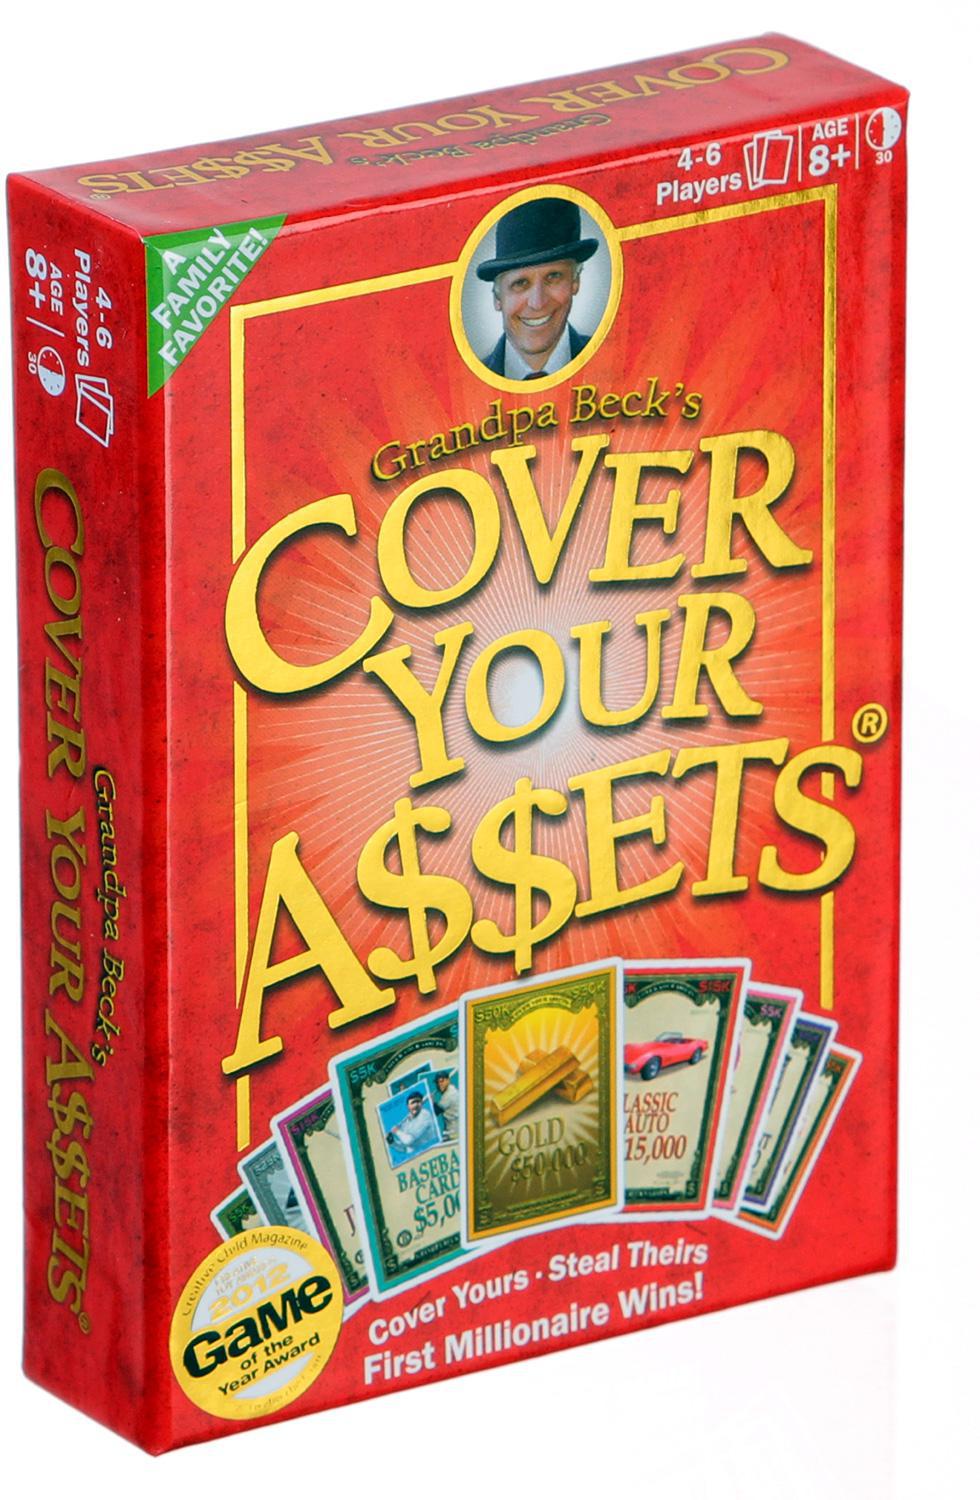 Grandpa Beck’s Cover Your Assets Card Game Last One! Fun Family-Friendly 